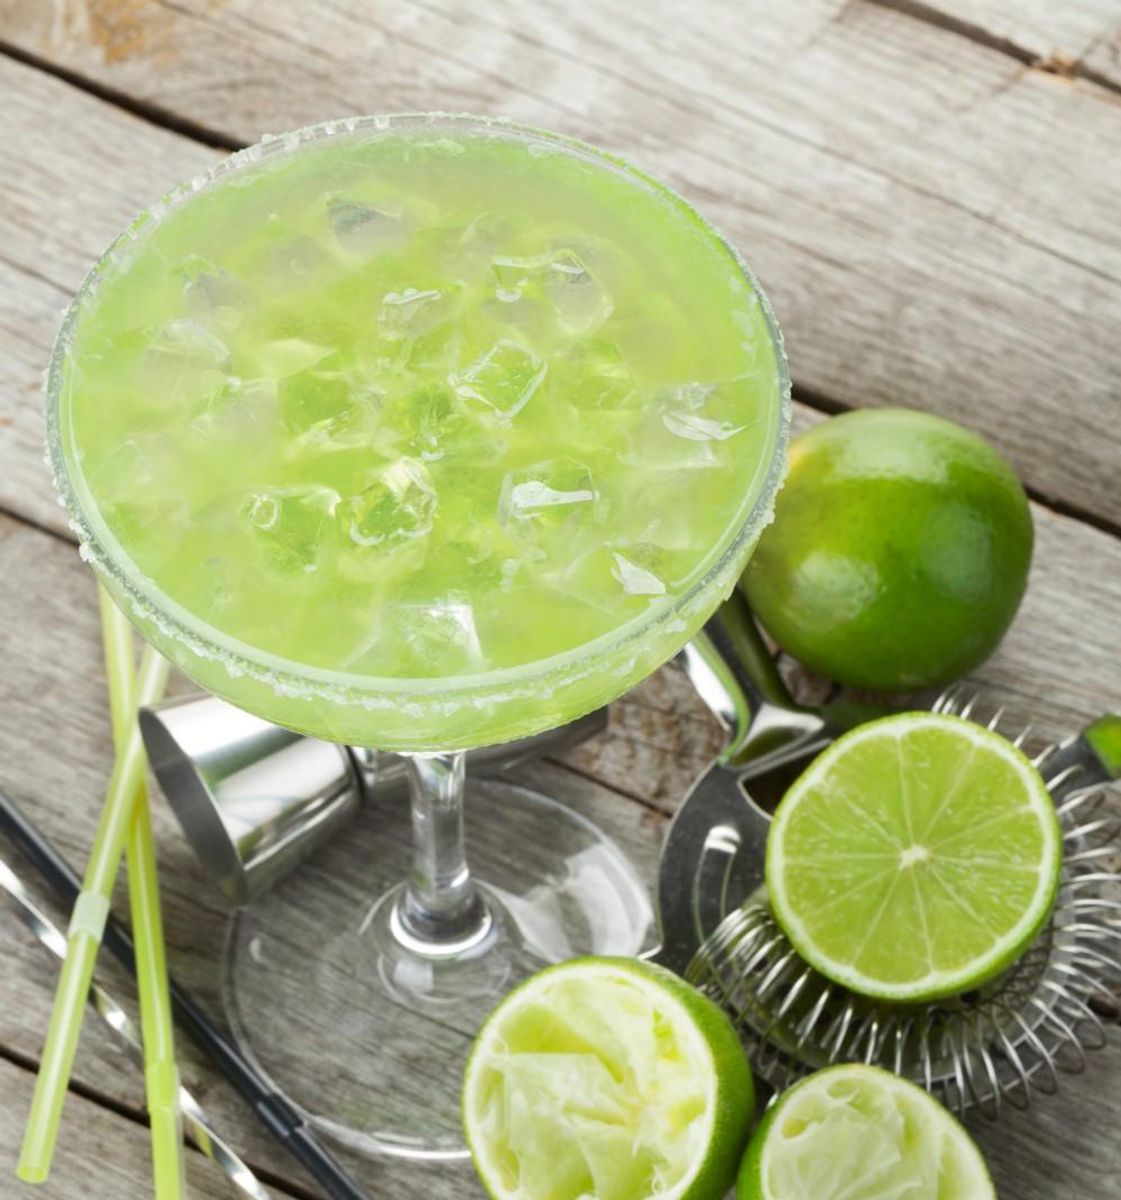 Delicious Margarita Recipes: Classic and Iced